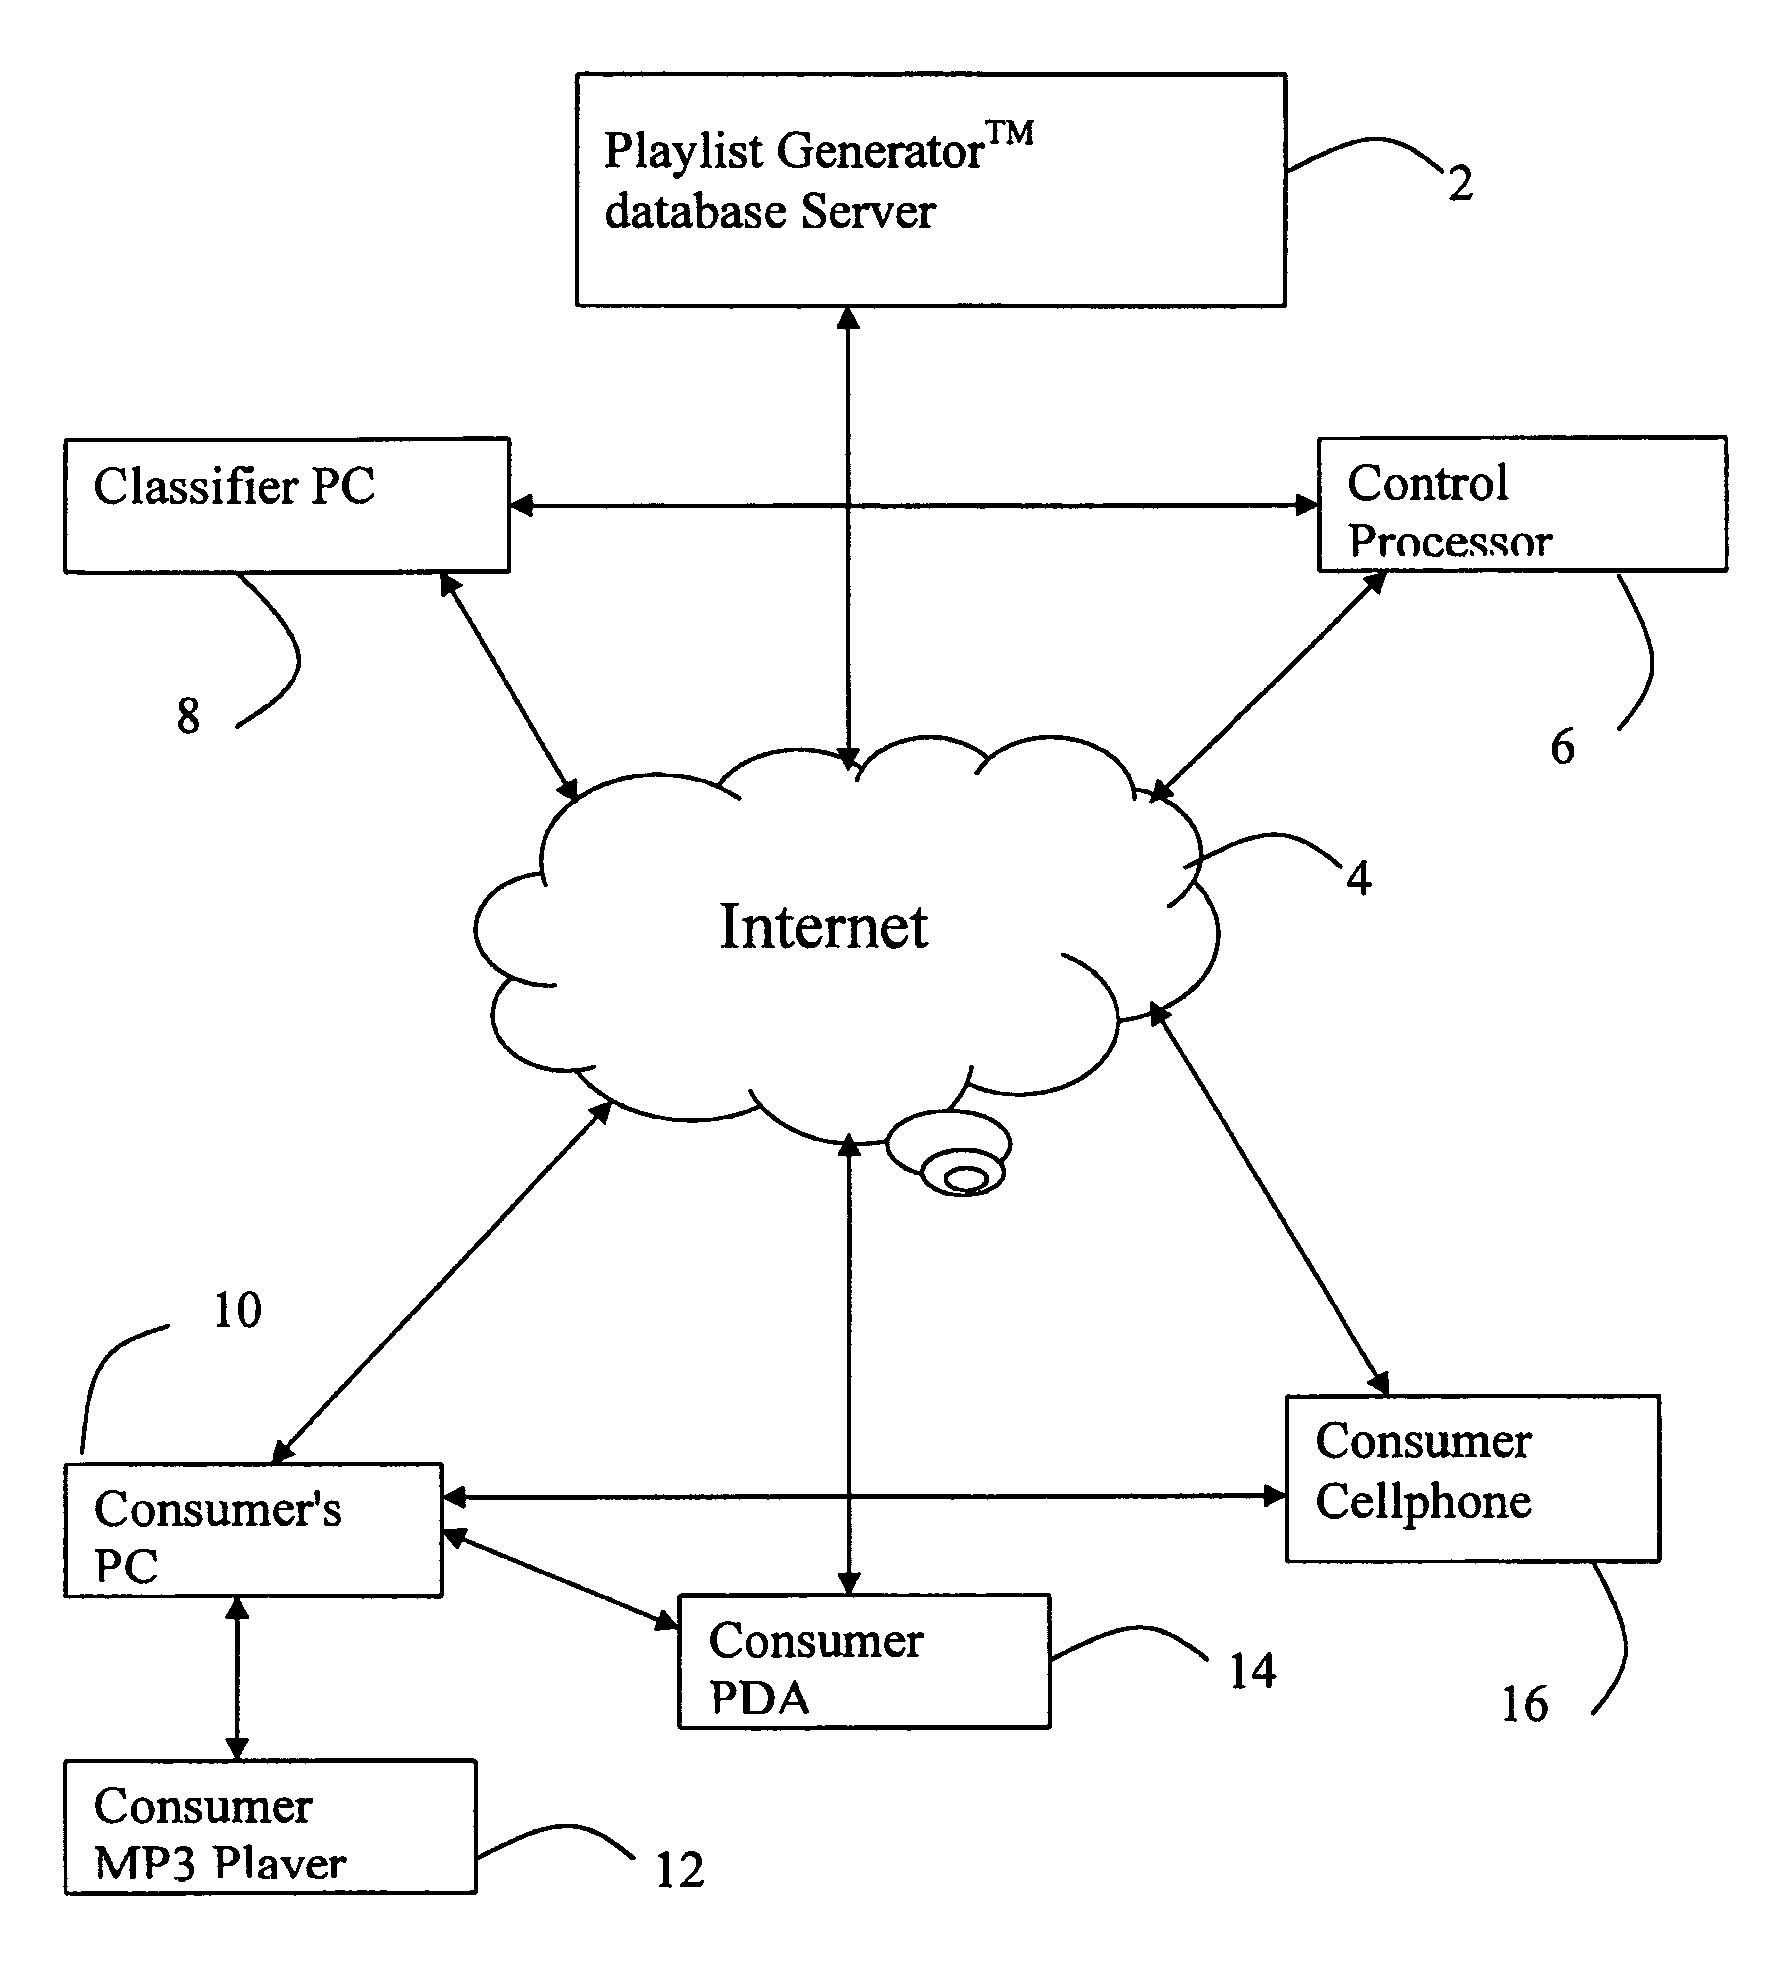 Method and apparatus for generating and updating a pre-categorized song database from which consumers may select and then download desired playlists